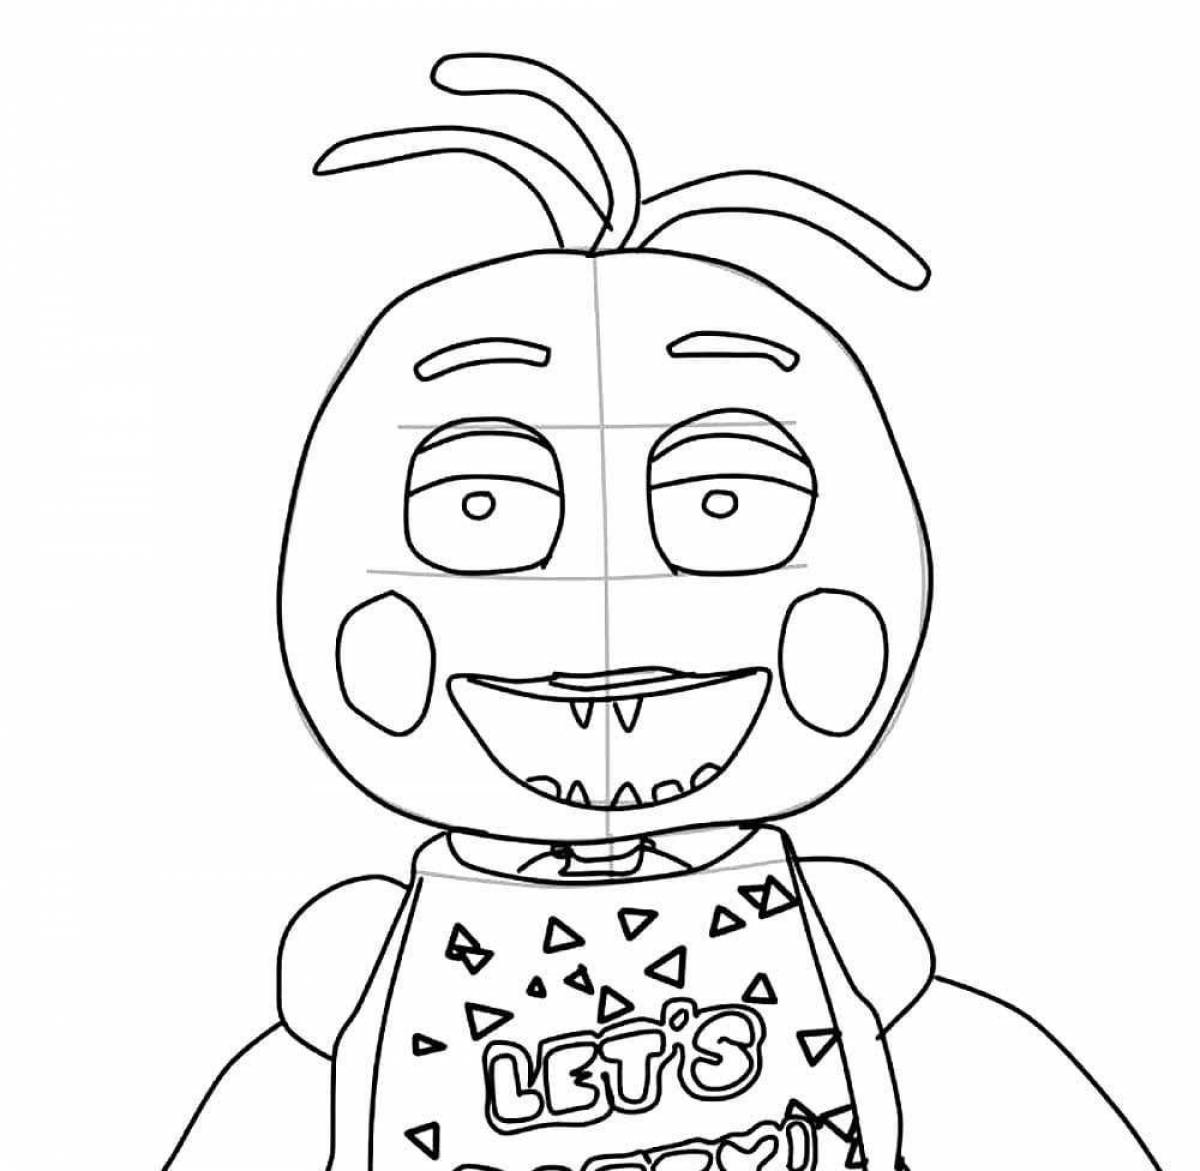 Chica's wonderful animatronic coloring book